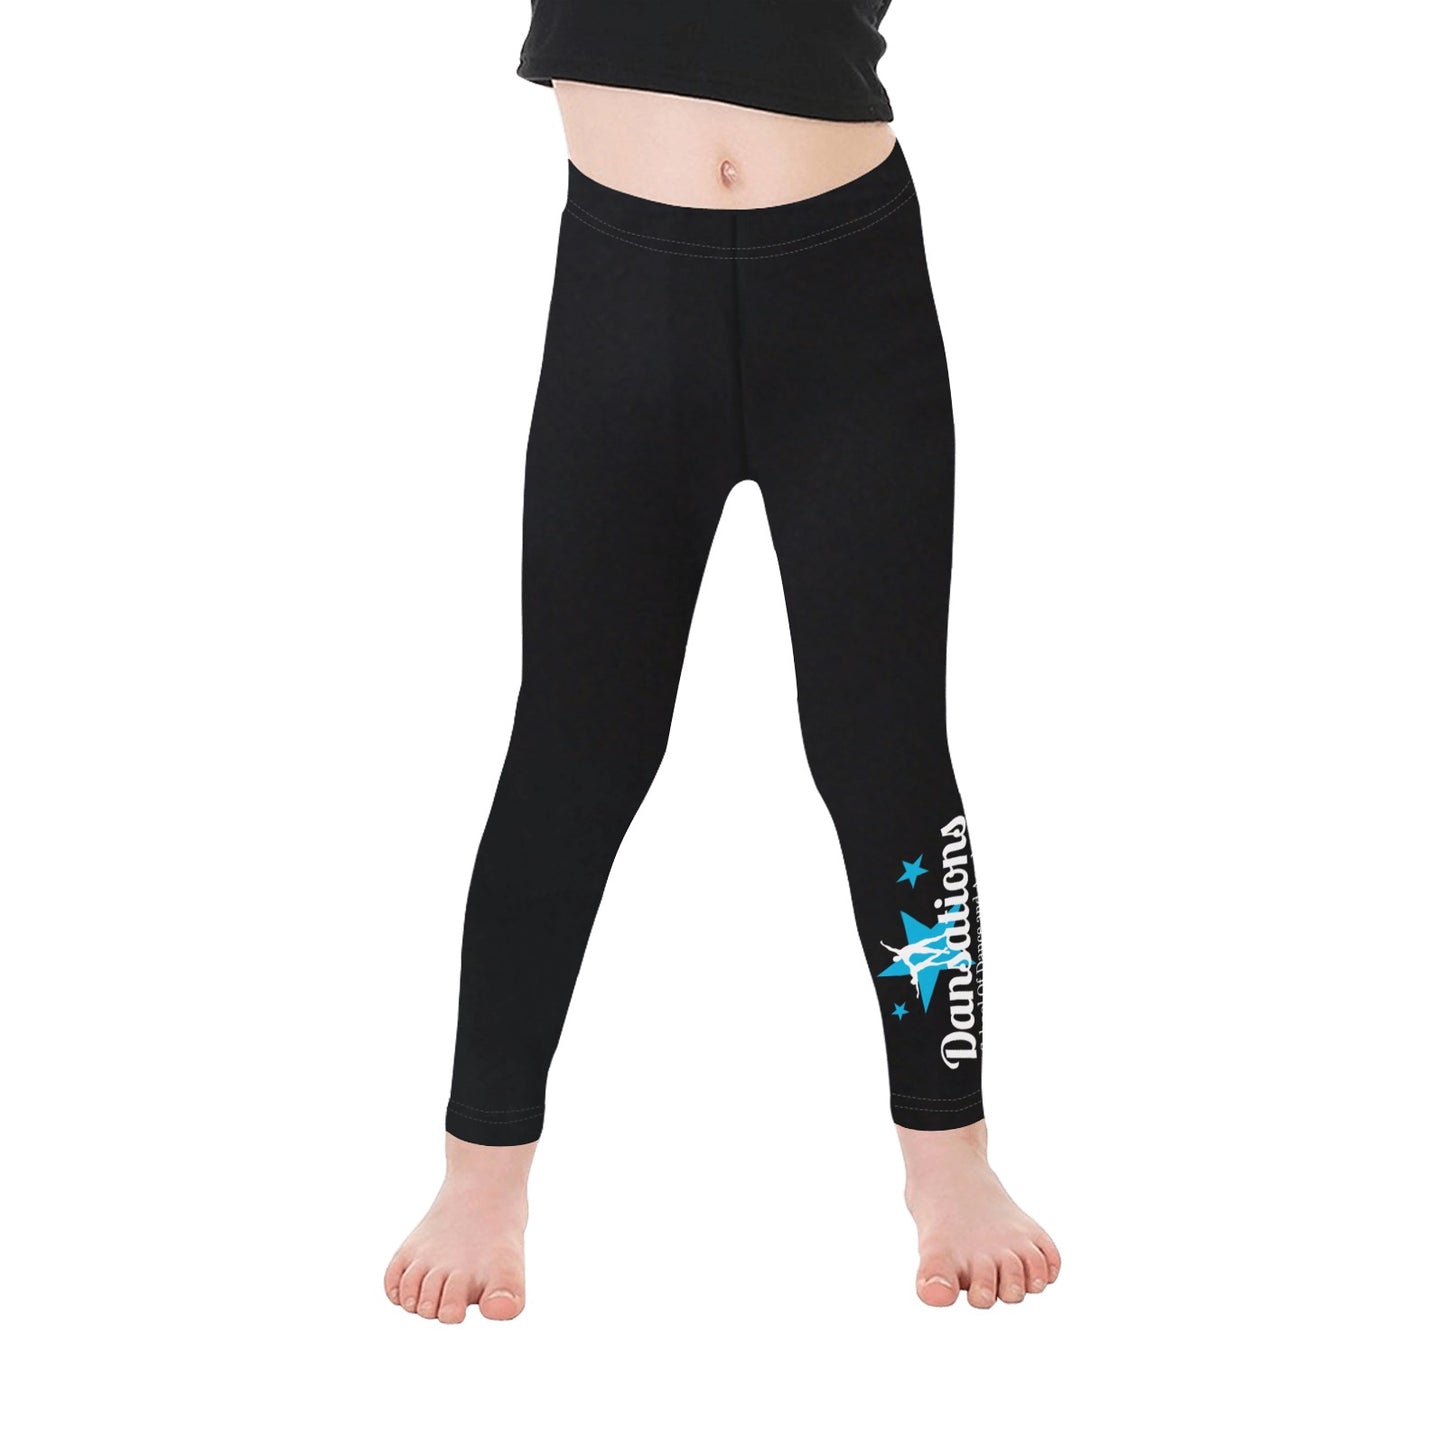 Dansations Competition Team Youth Leggings